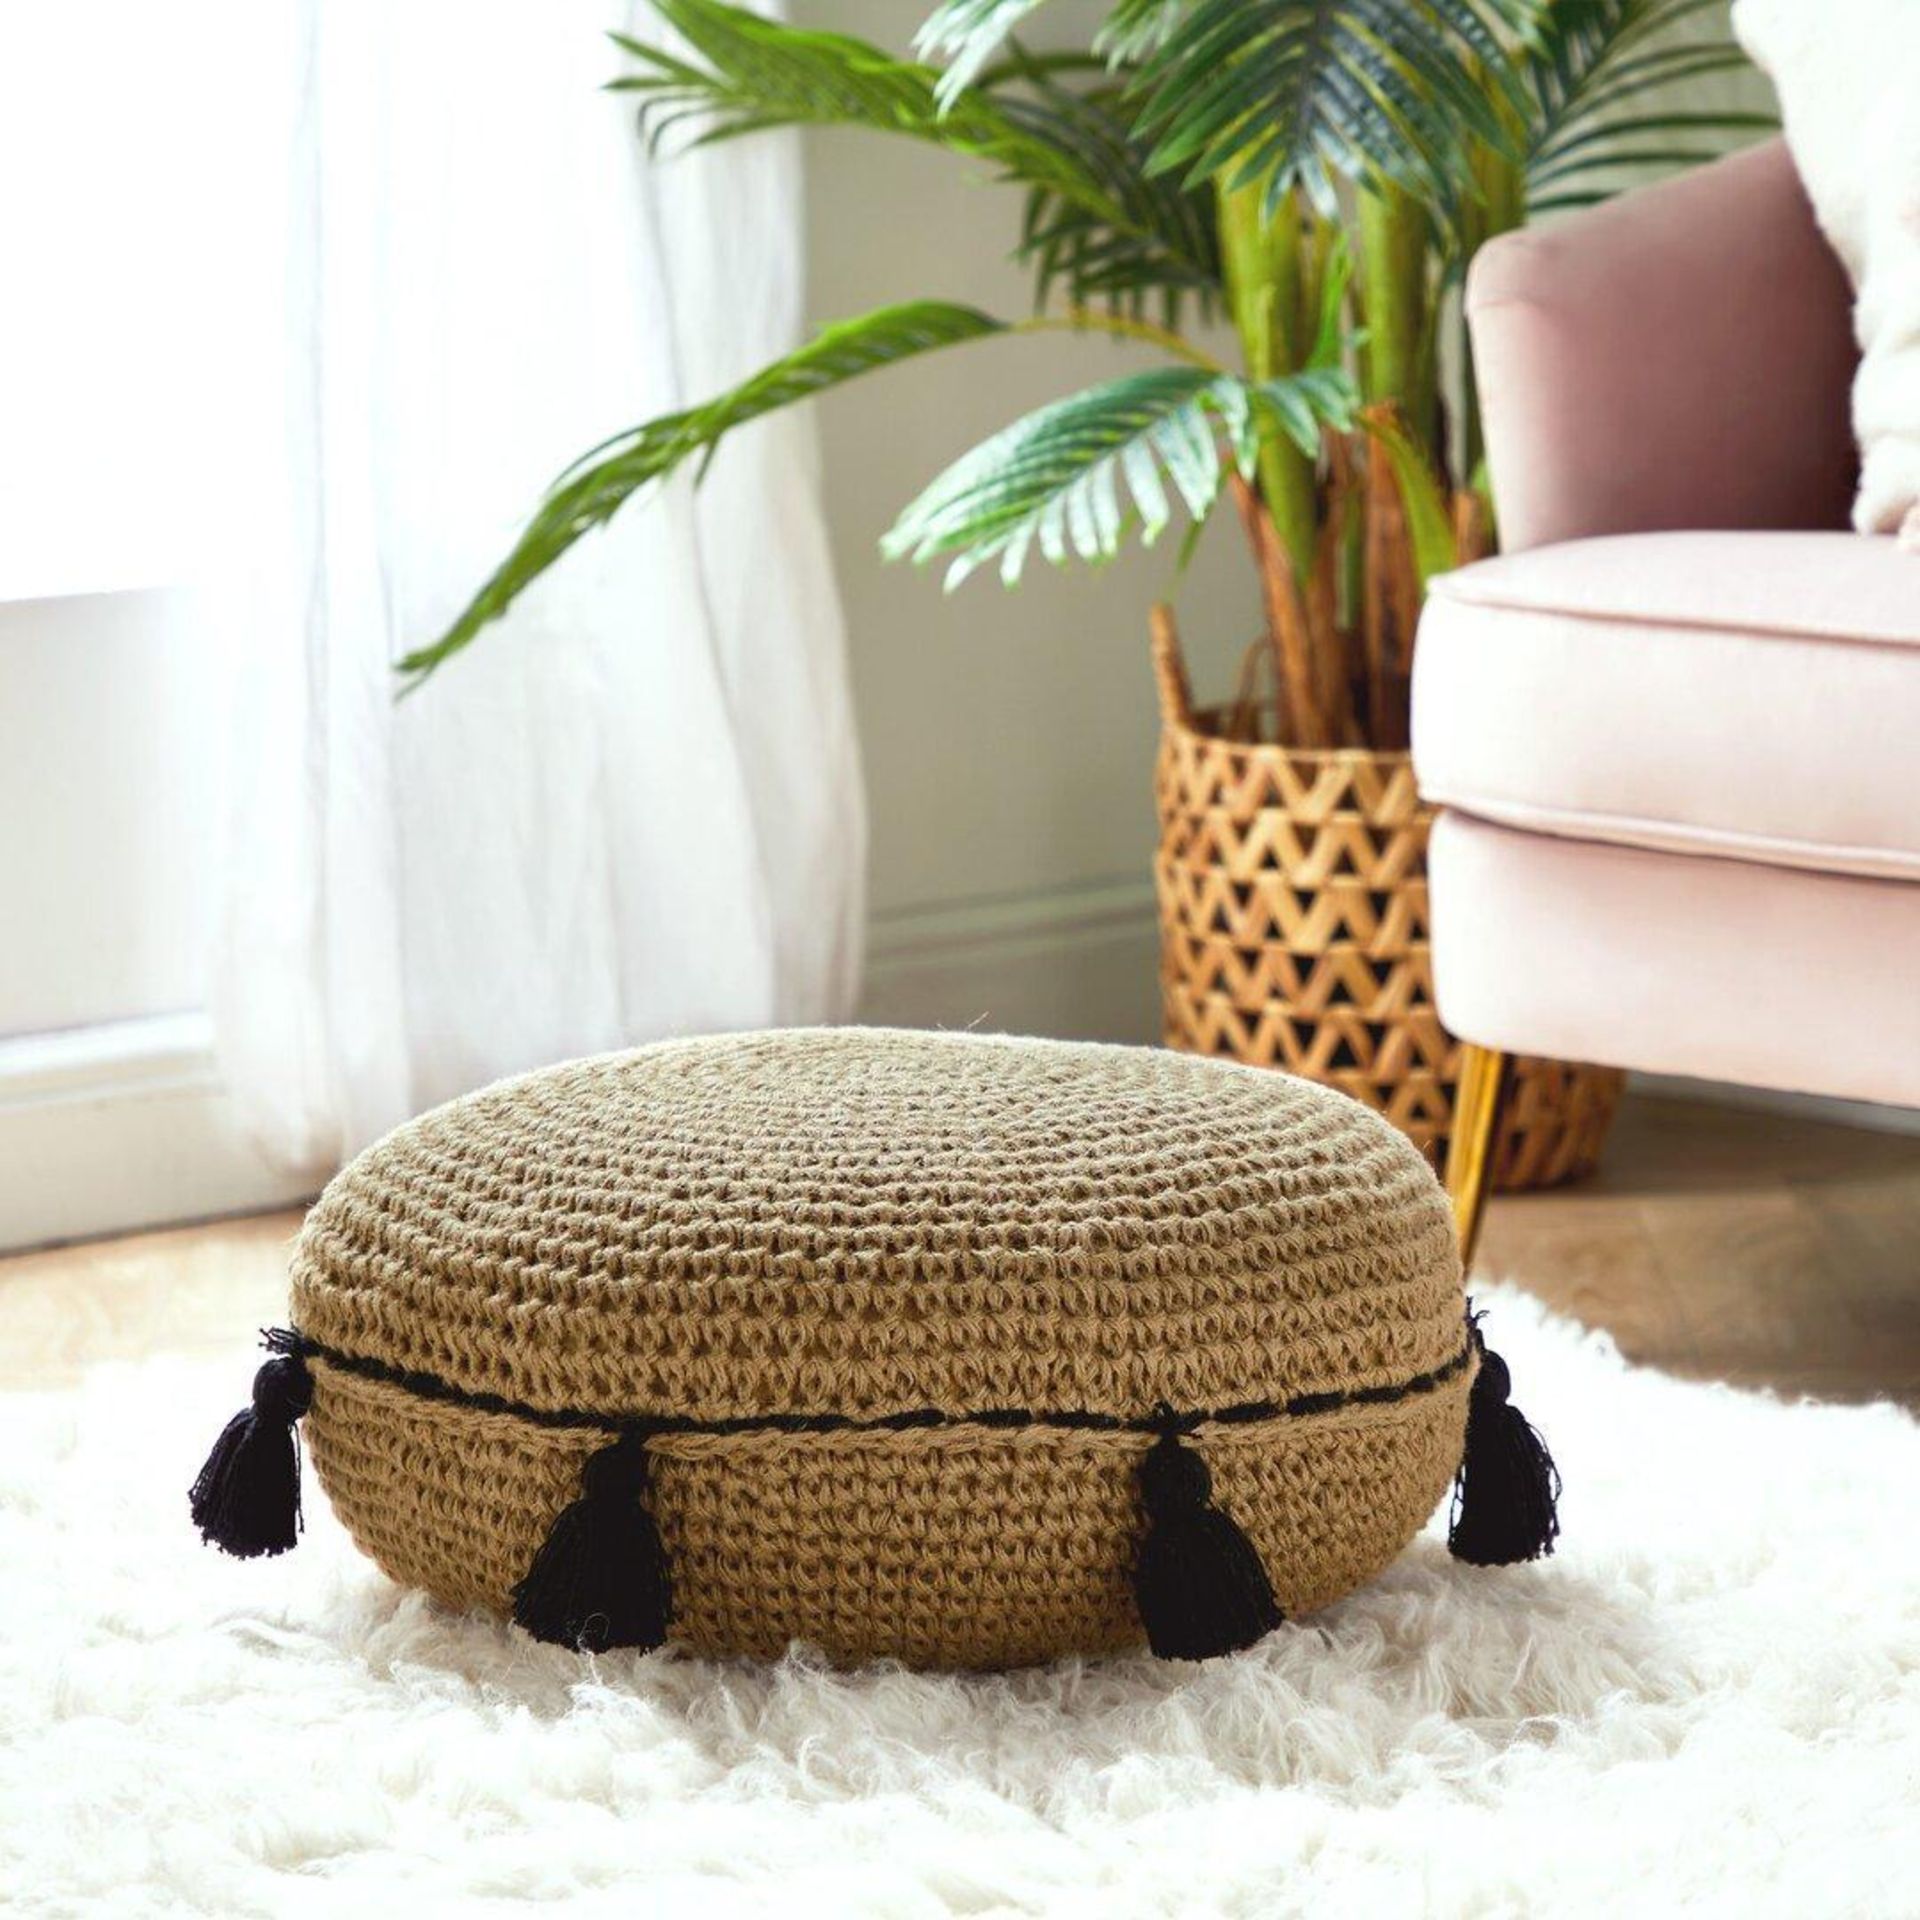 Jute Tassel Floor Cushion - PW. Jute Tassel Floor CushionAdd a touch of unique style to your